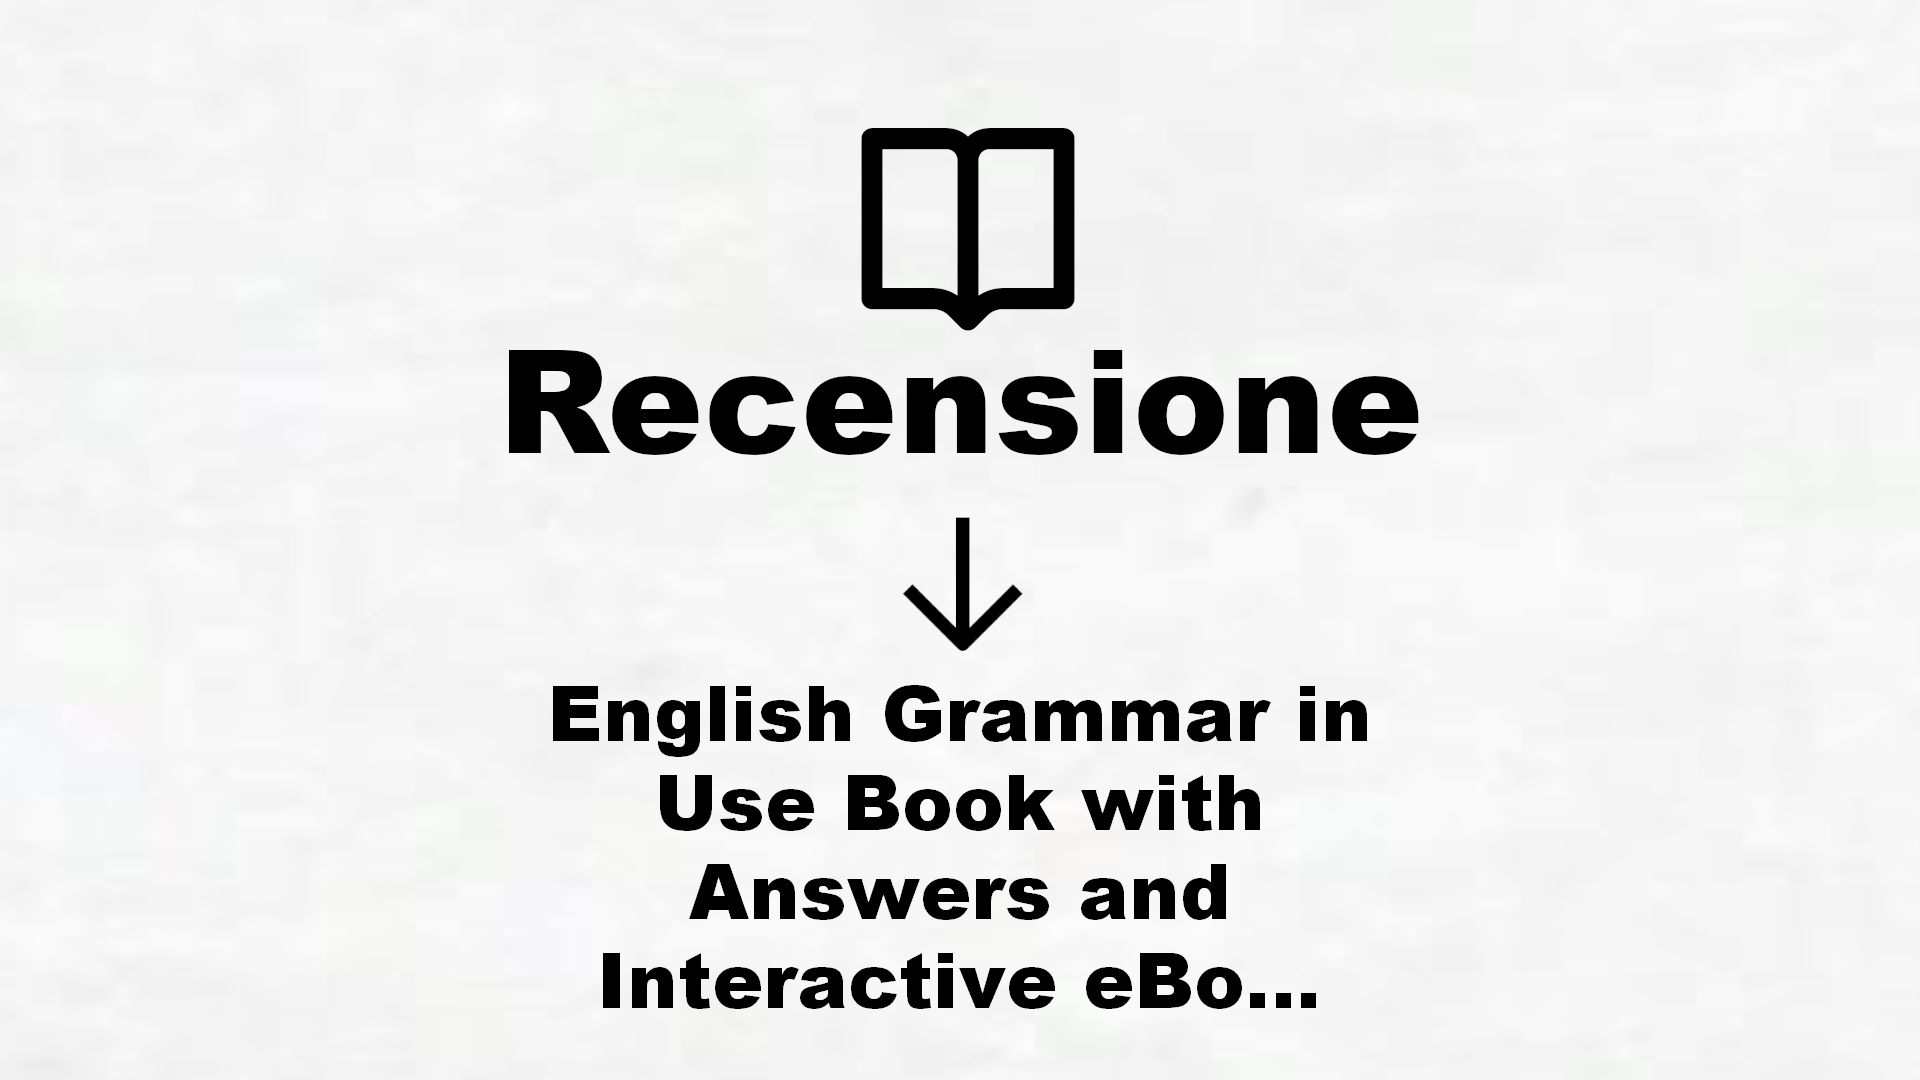 English Grammar in Use Book with Answers and Interactive eBook: Self-Study Reference and Practice Book for Intermediate Learners of English [Lingua inglese] – Recensione Libro